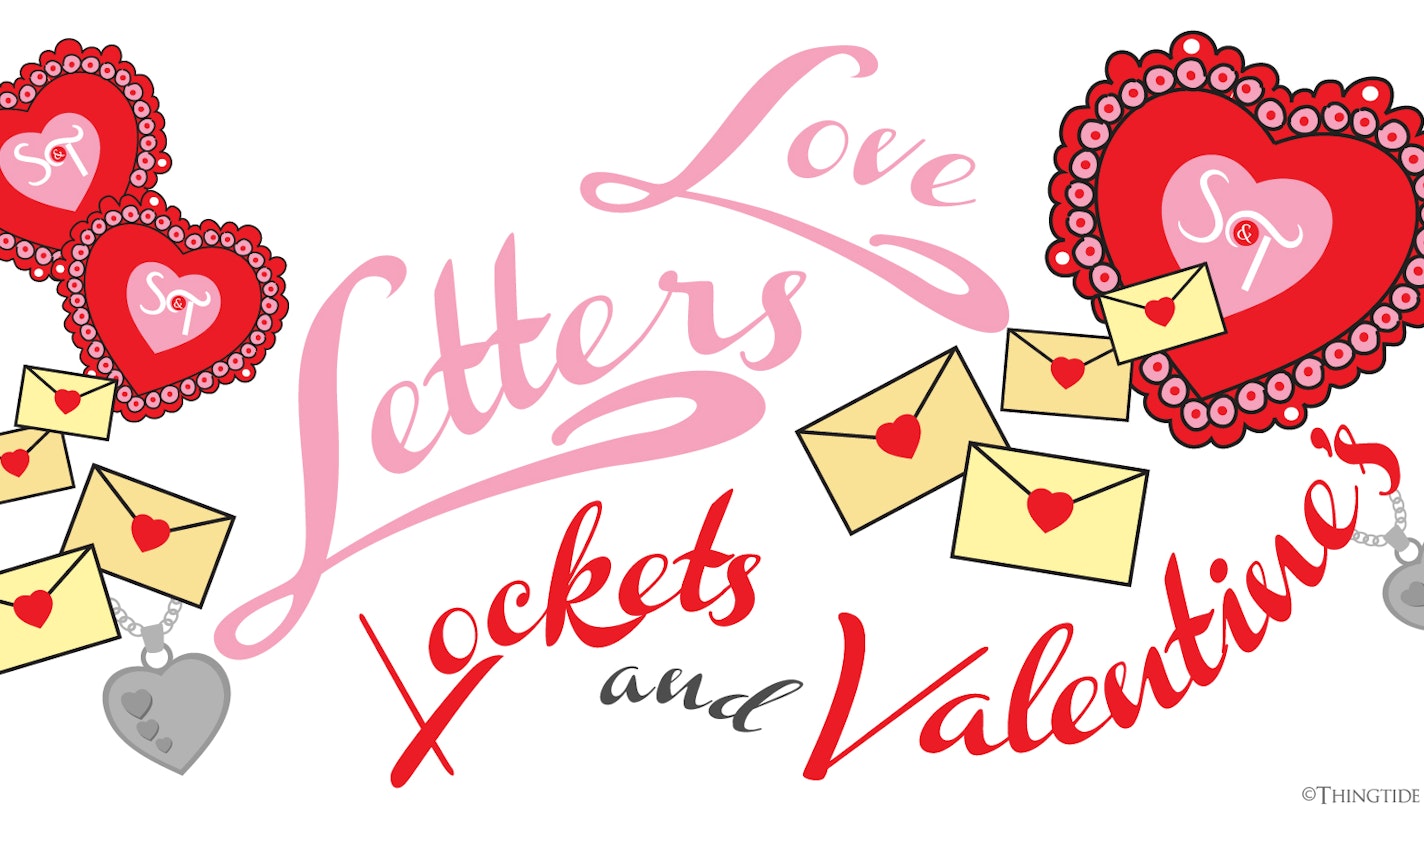 Show & Tale: Love Letters, Lockets & Valentines